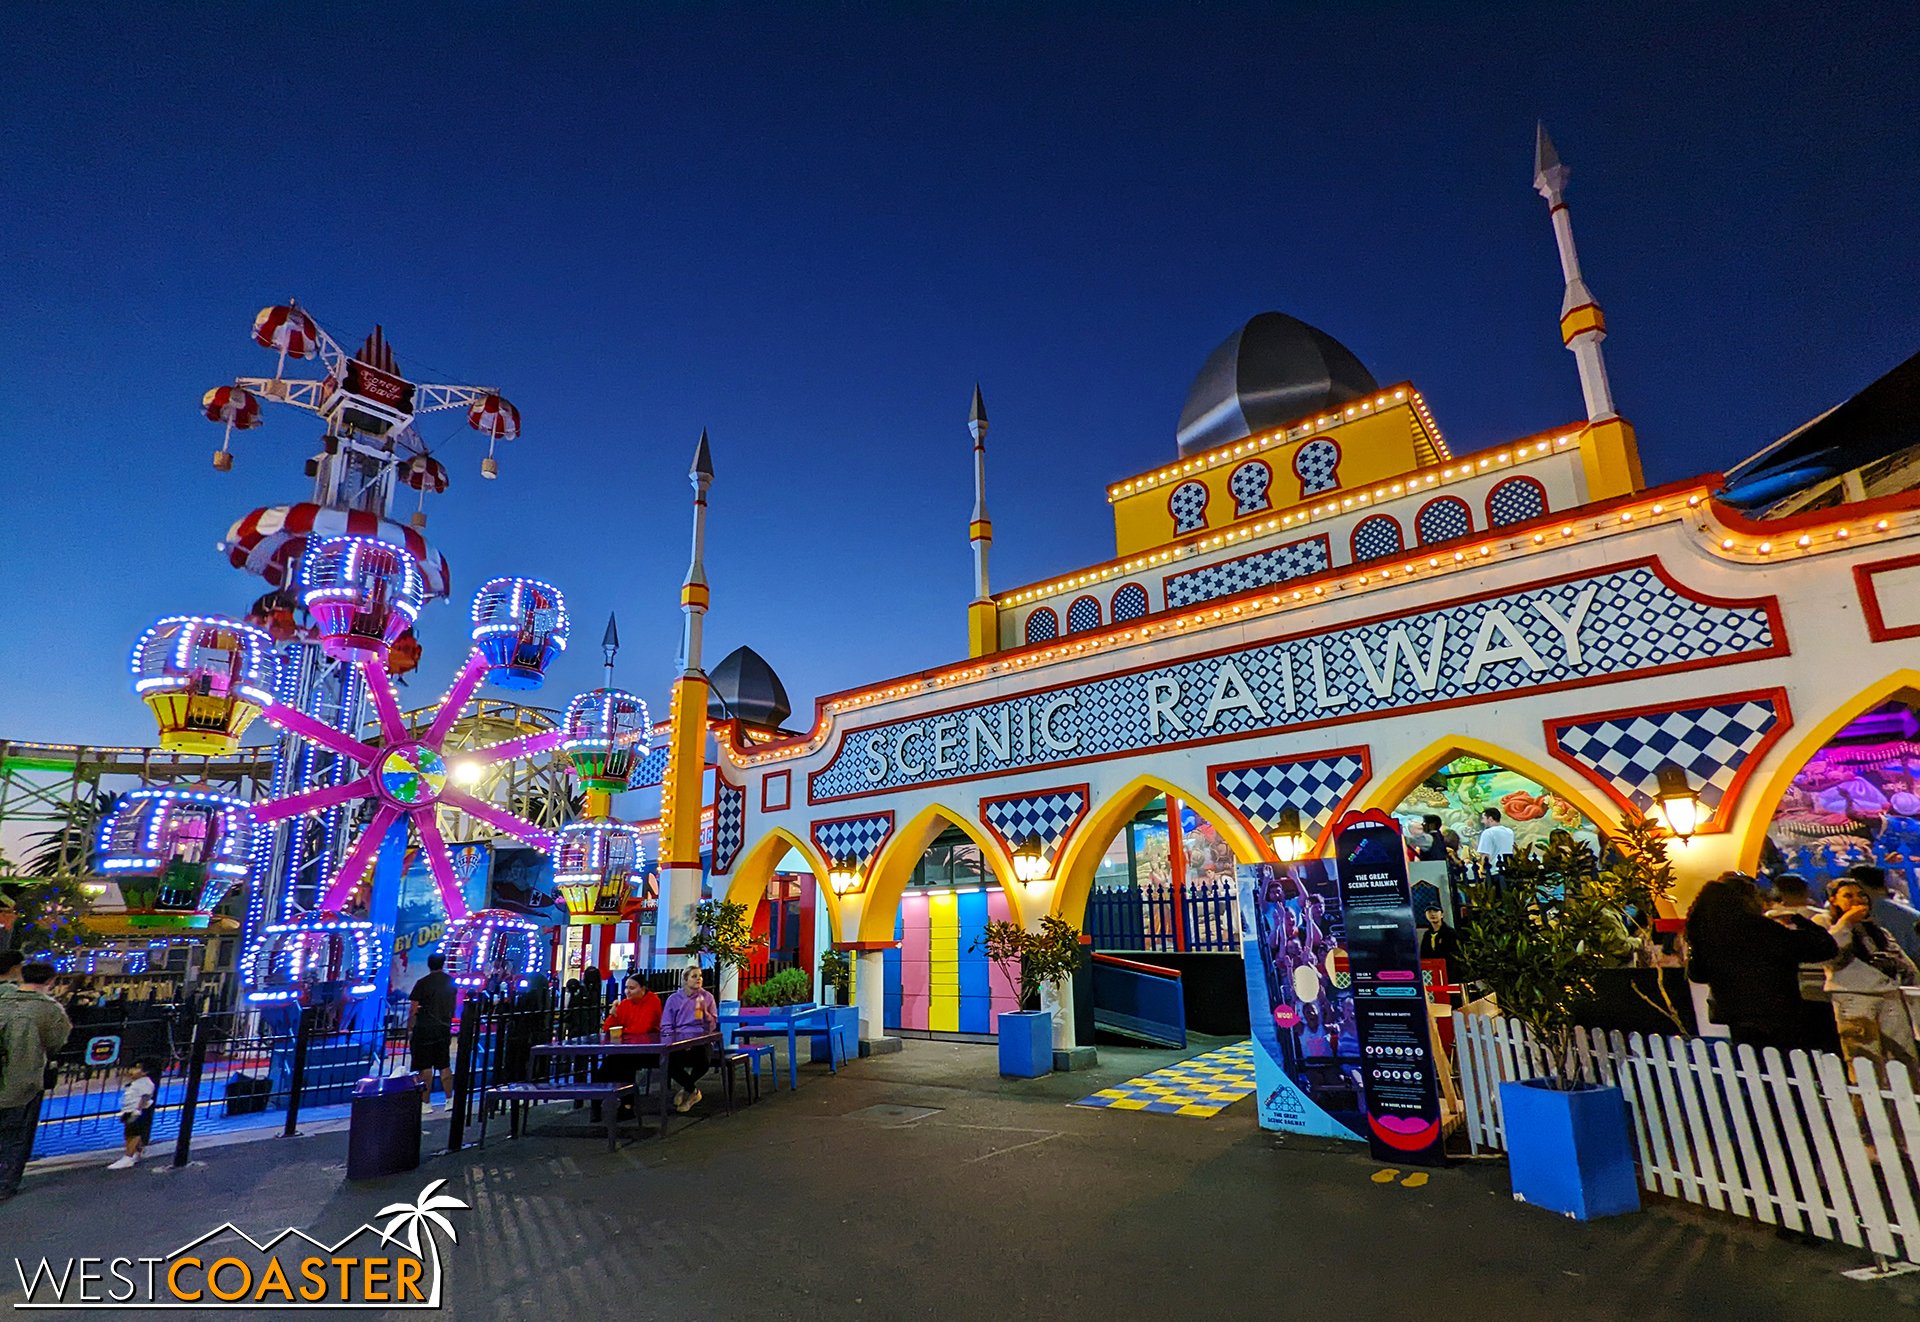  The Great Scenic Railway is the star attraction at Luna Park Melbourne. 